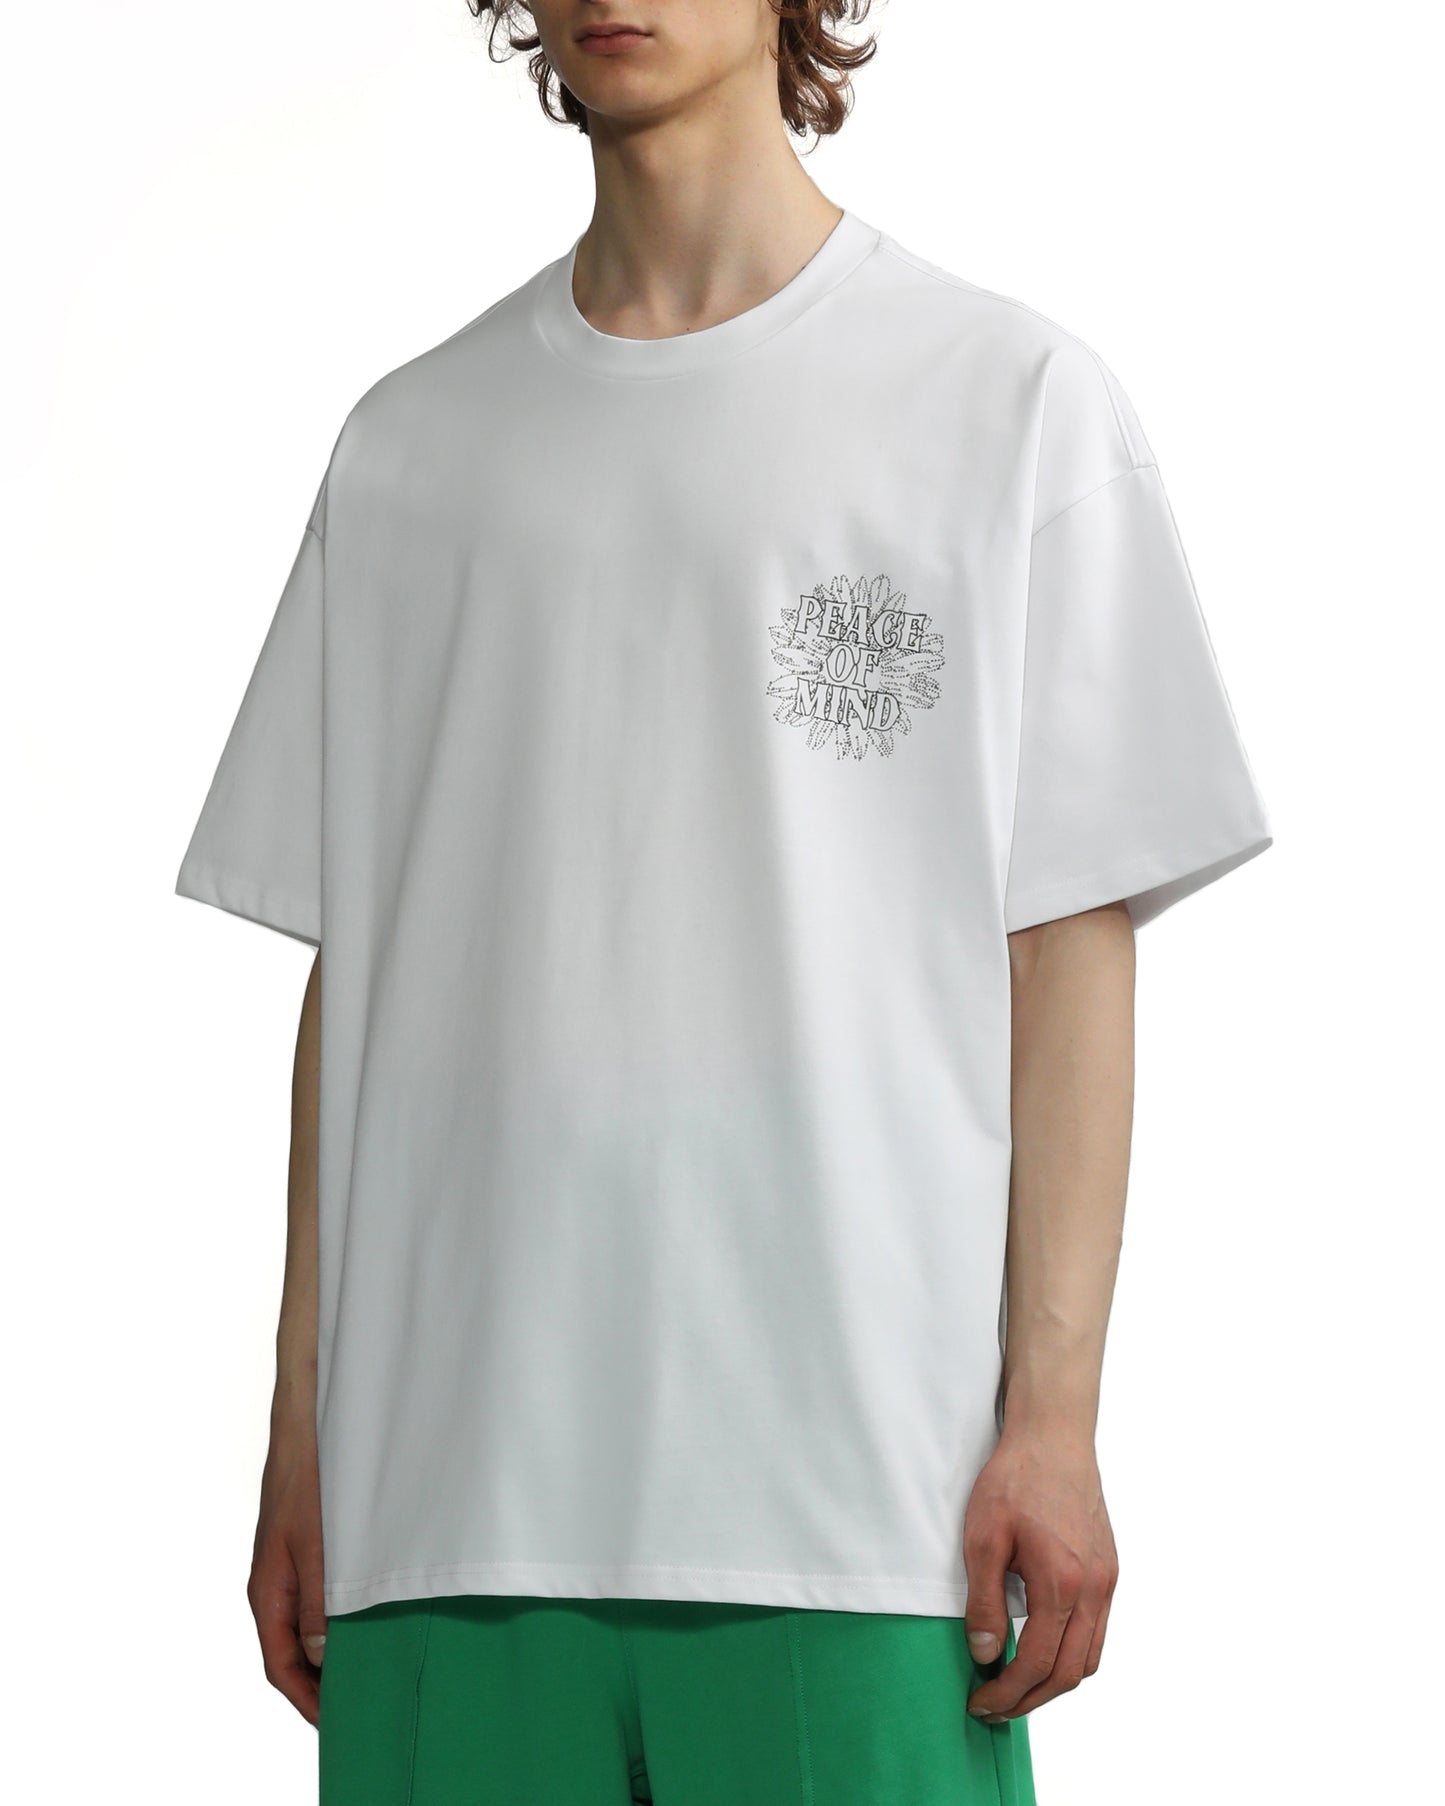 Men's Peace of Mind T-shirt in White